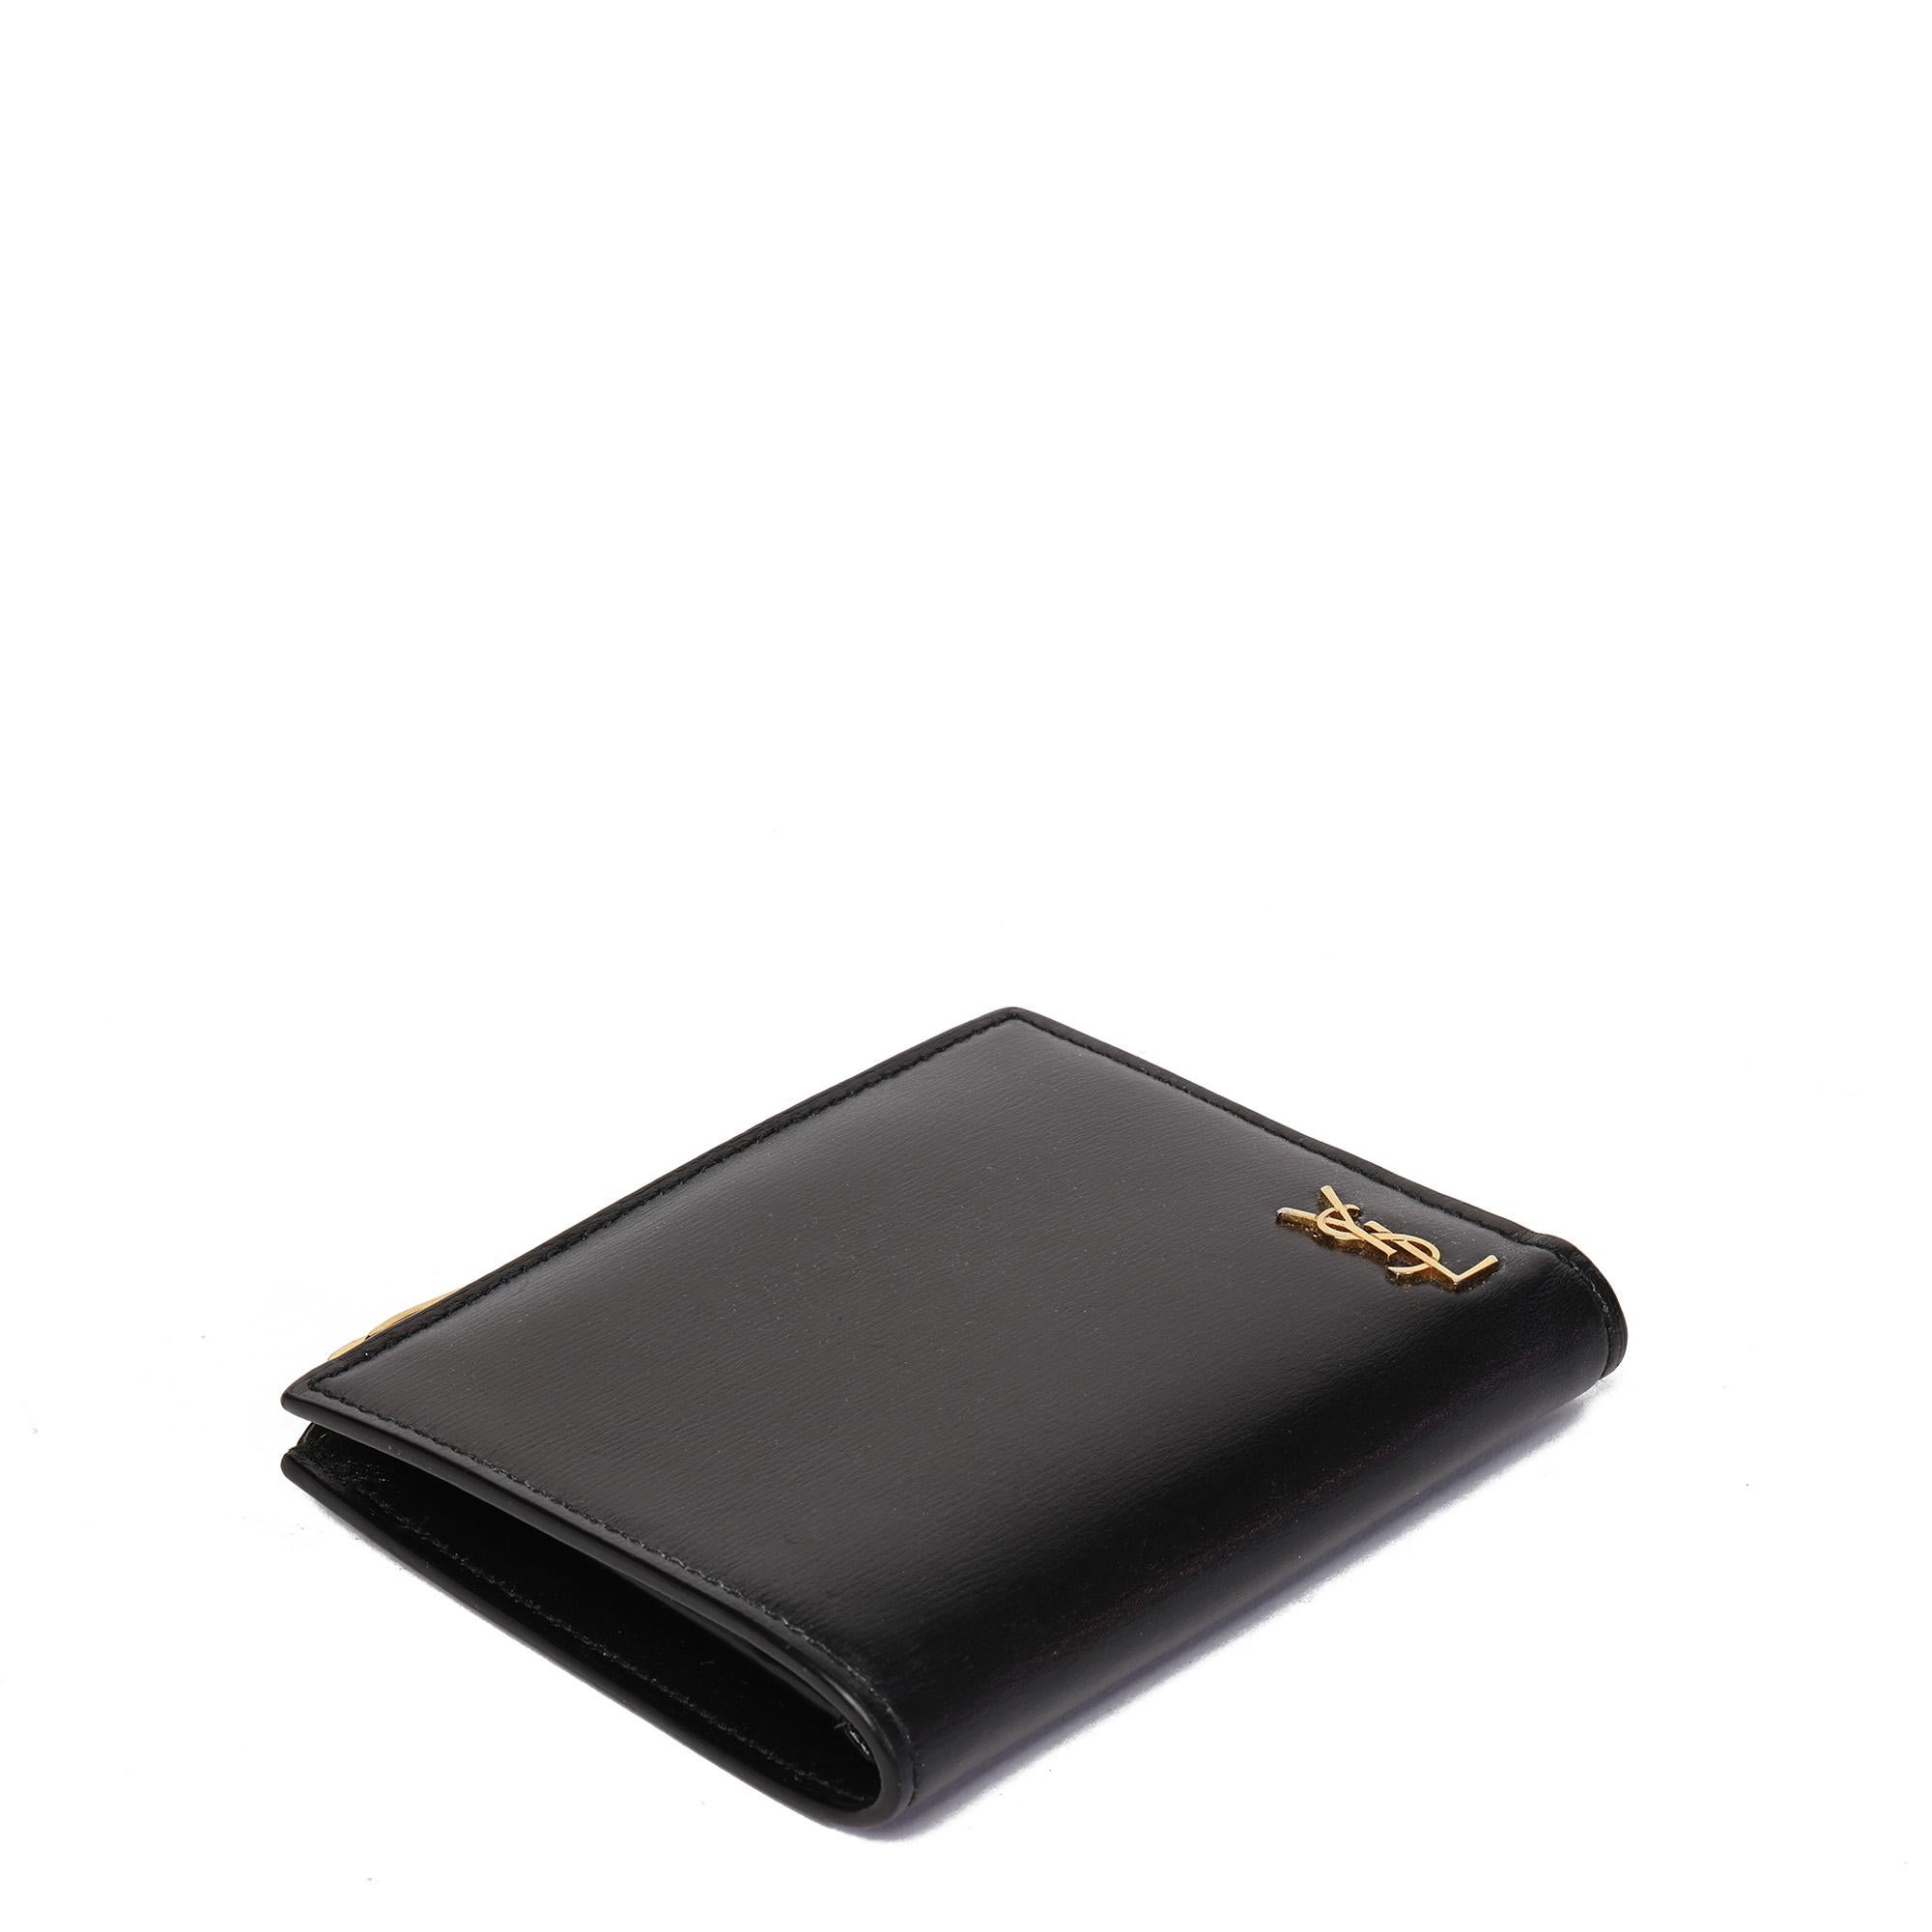 Saint Laurent Black Grained Leather TIny Cassandre Bi-fold ID Wallet

CONDITION NOTES
The exterior is in very good condition with minimal signs of use.
The interior is in very good condition with minimal signs of use.
The hardware is in very good